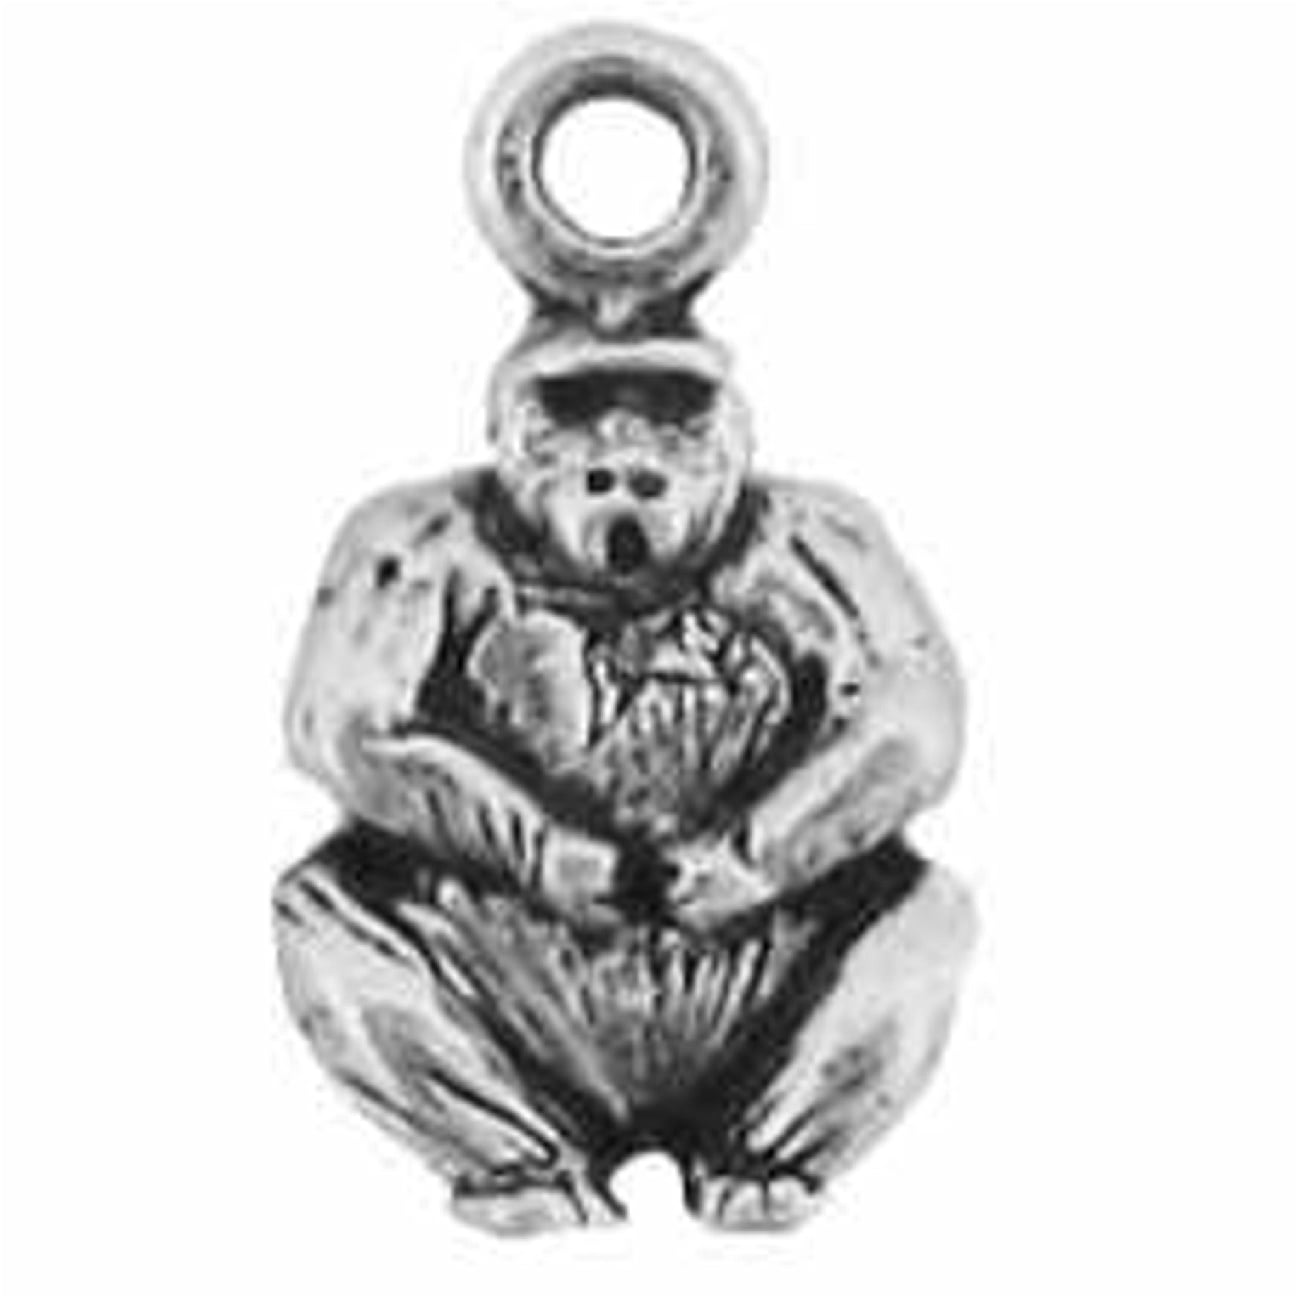 18" or 24" Inch Chain Necklace & Gorilla Pendant Charm Primate Monkey Gift